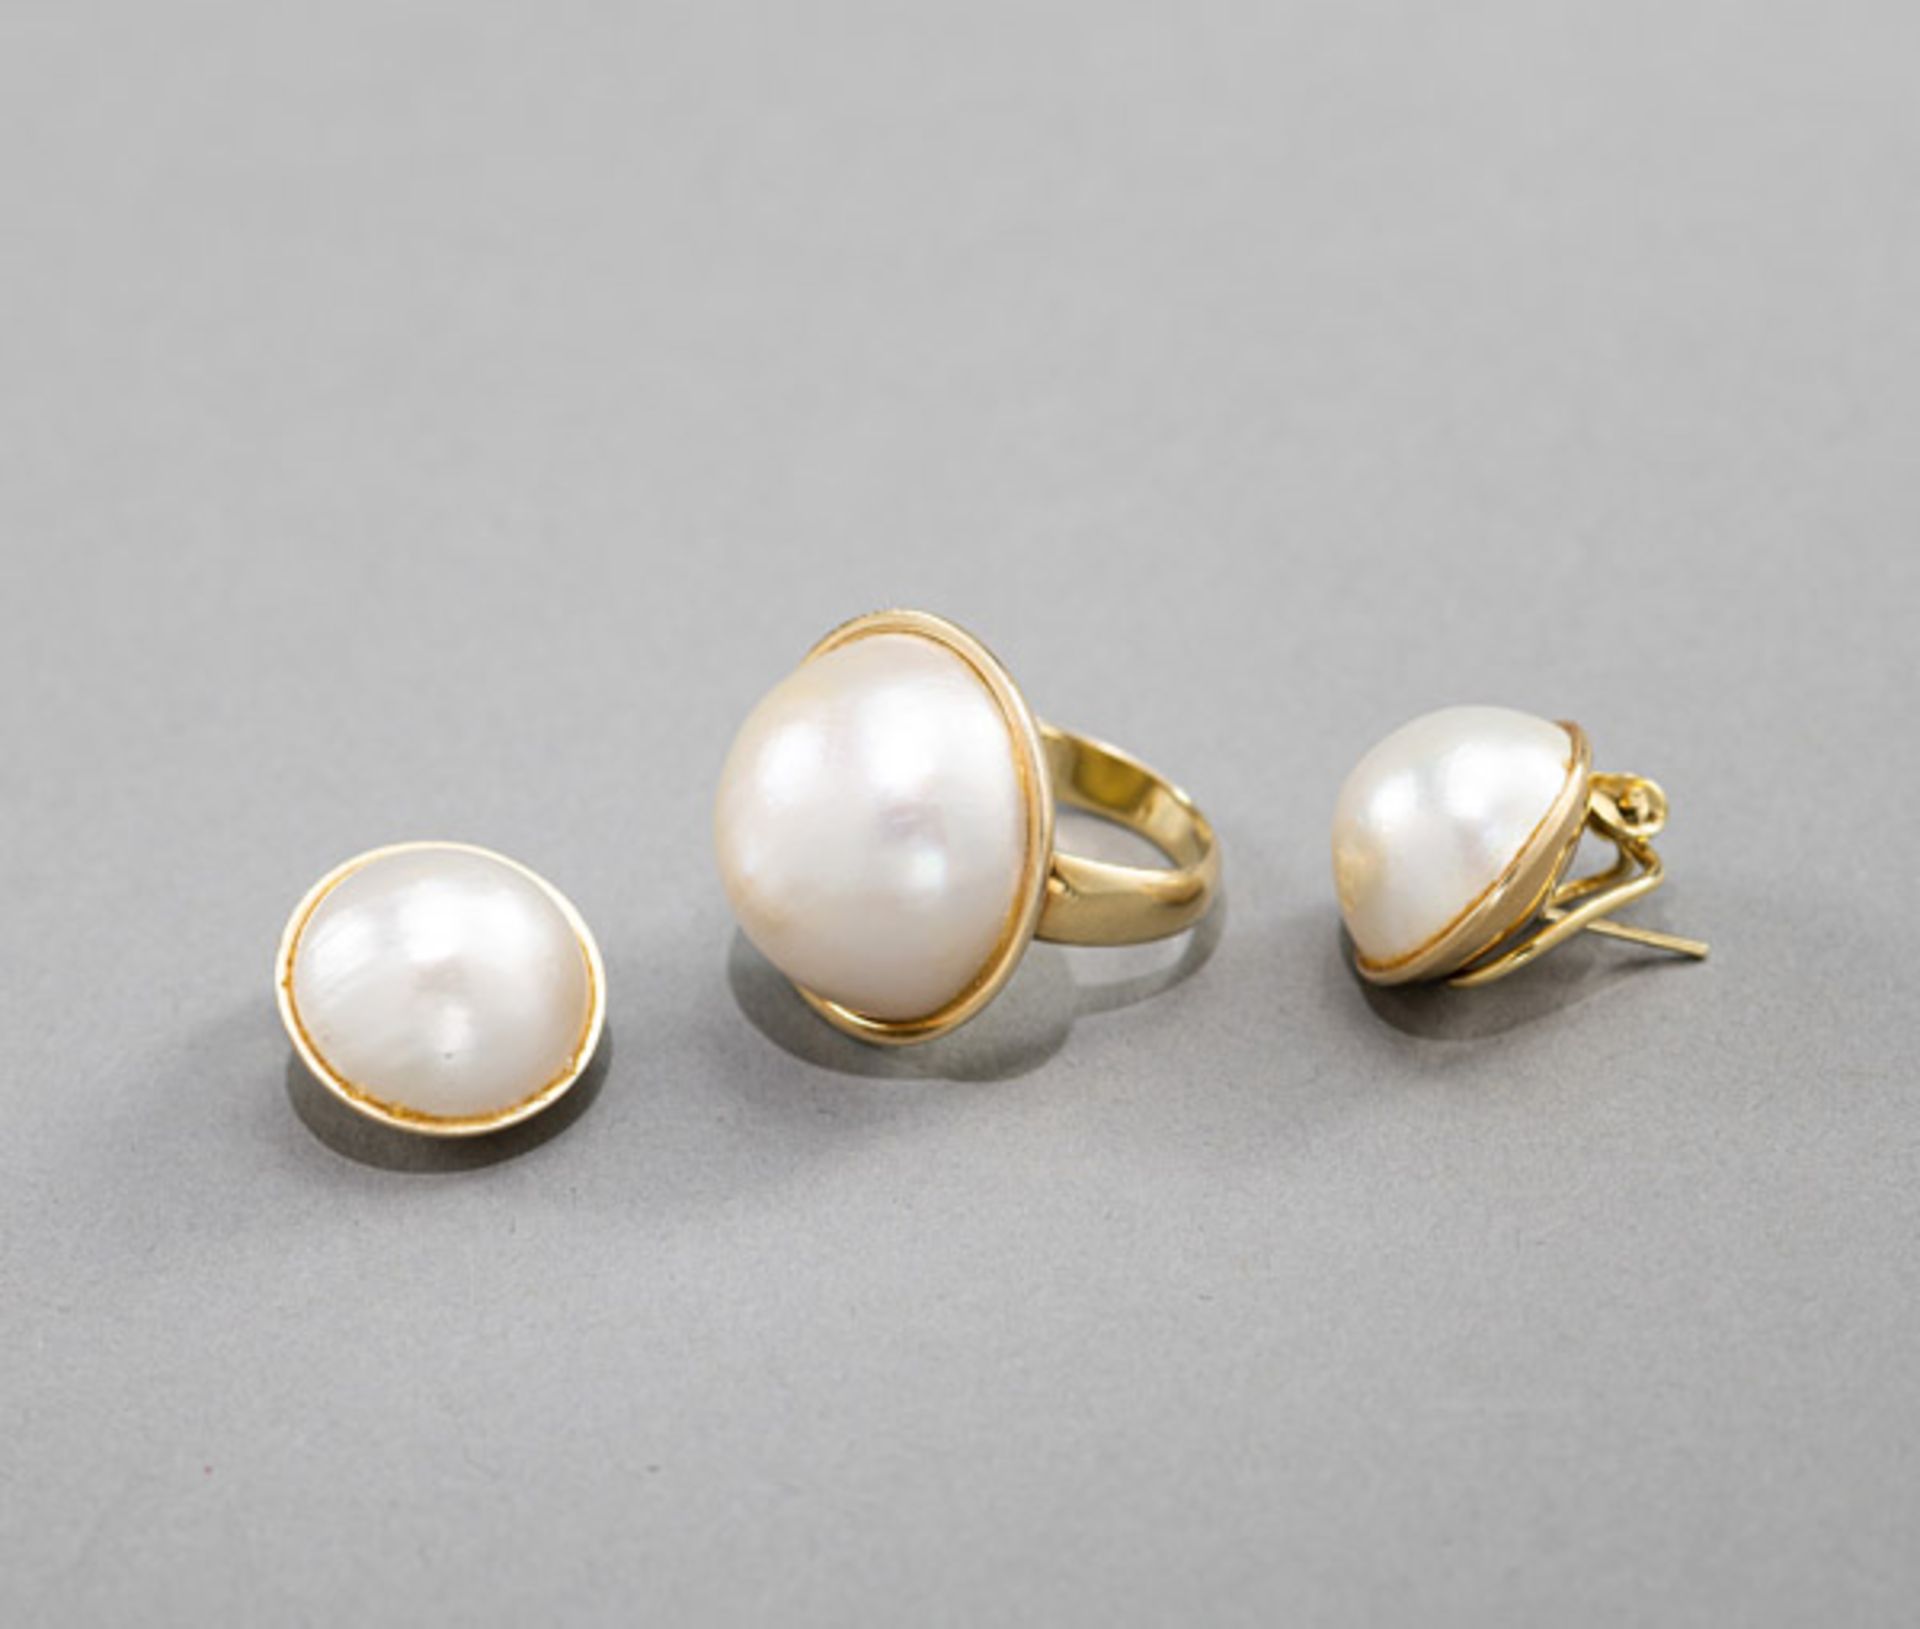 A PAIR OF PEARL EARCLIPS AND A RING